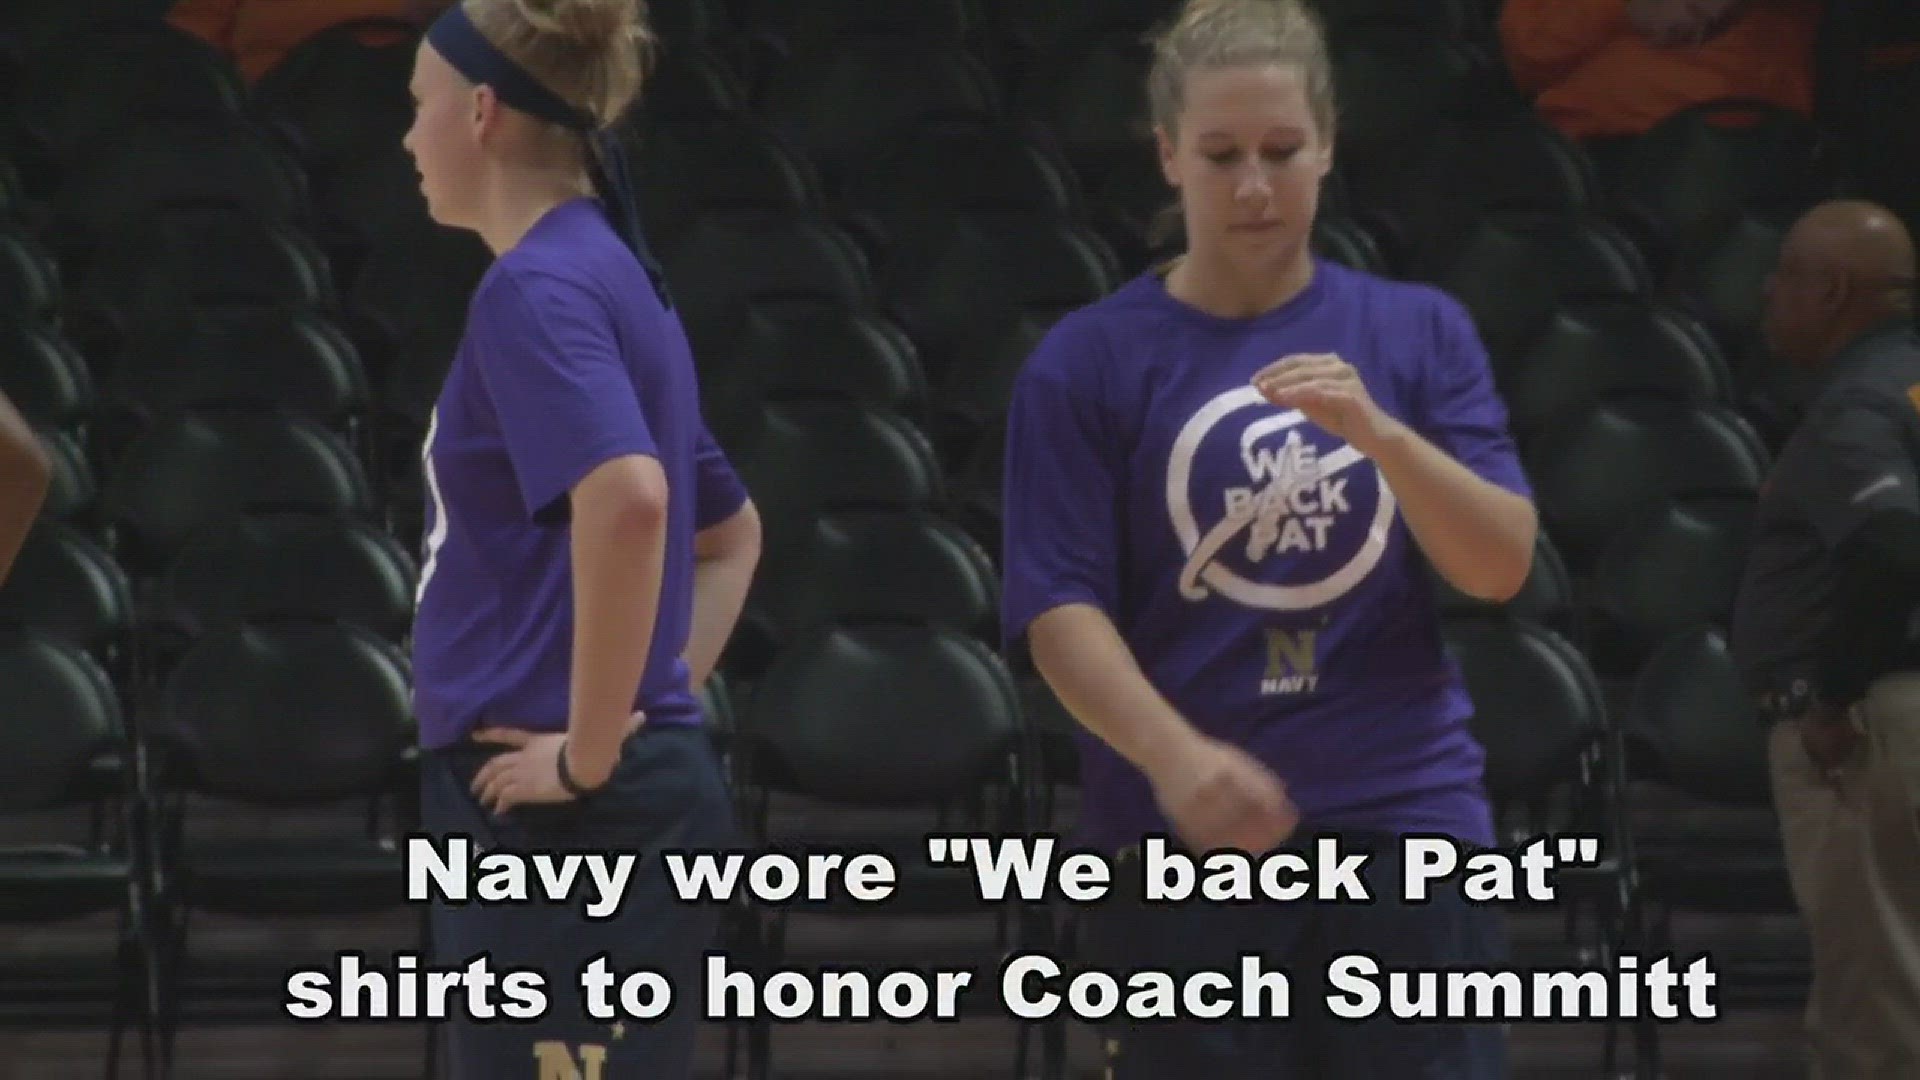 The Midshipmen women's basketball team wore "We Back Pat" shirts before Sunday's game against Tennessee.